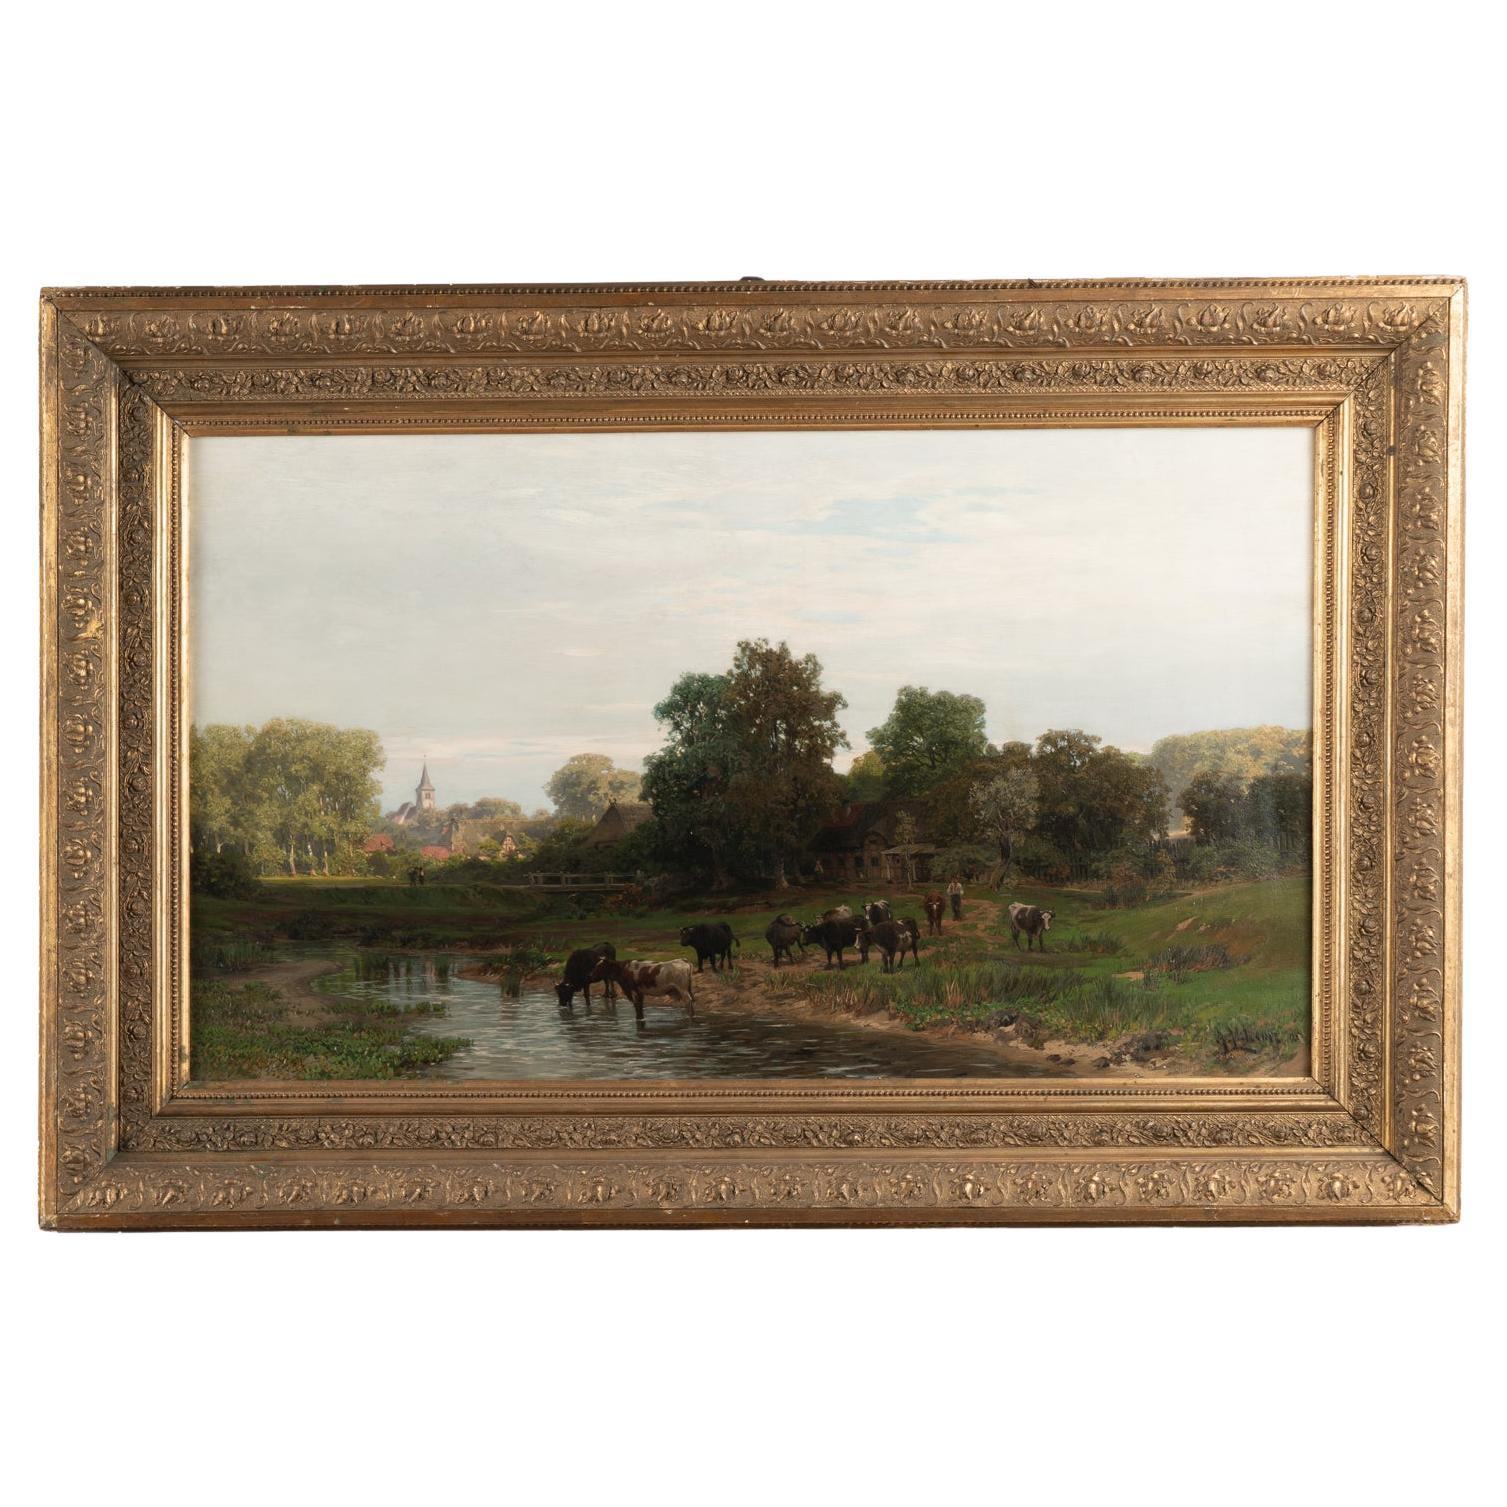 Oil on Canvas Painting of Cows by Stream, dated 1895 signed Alfred Metzener